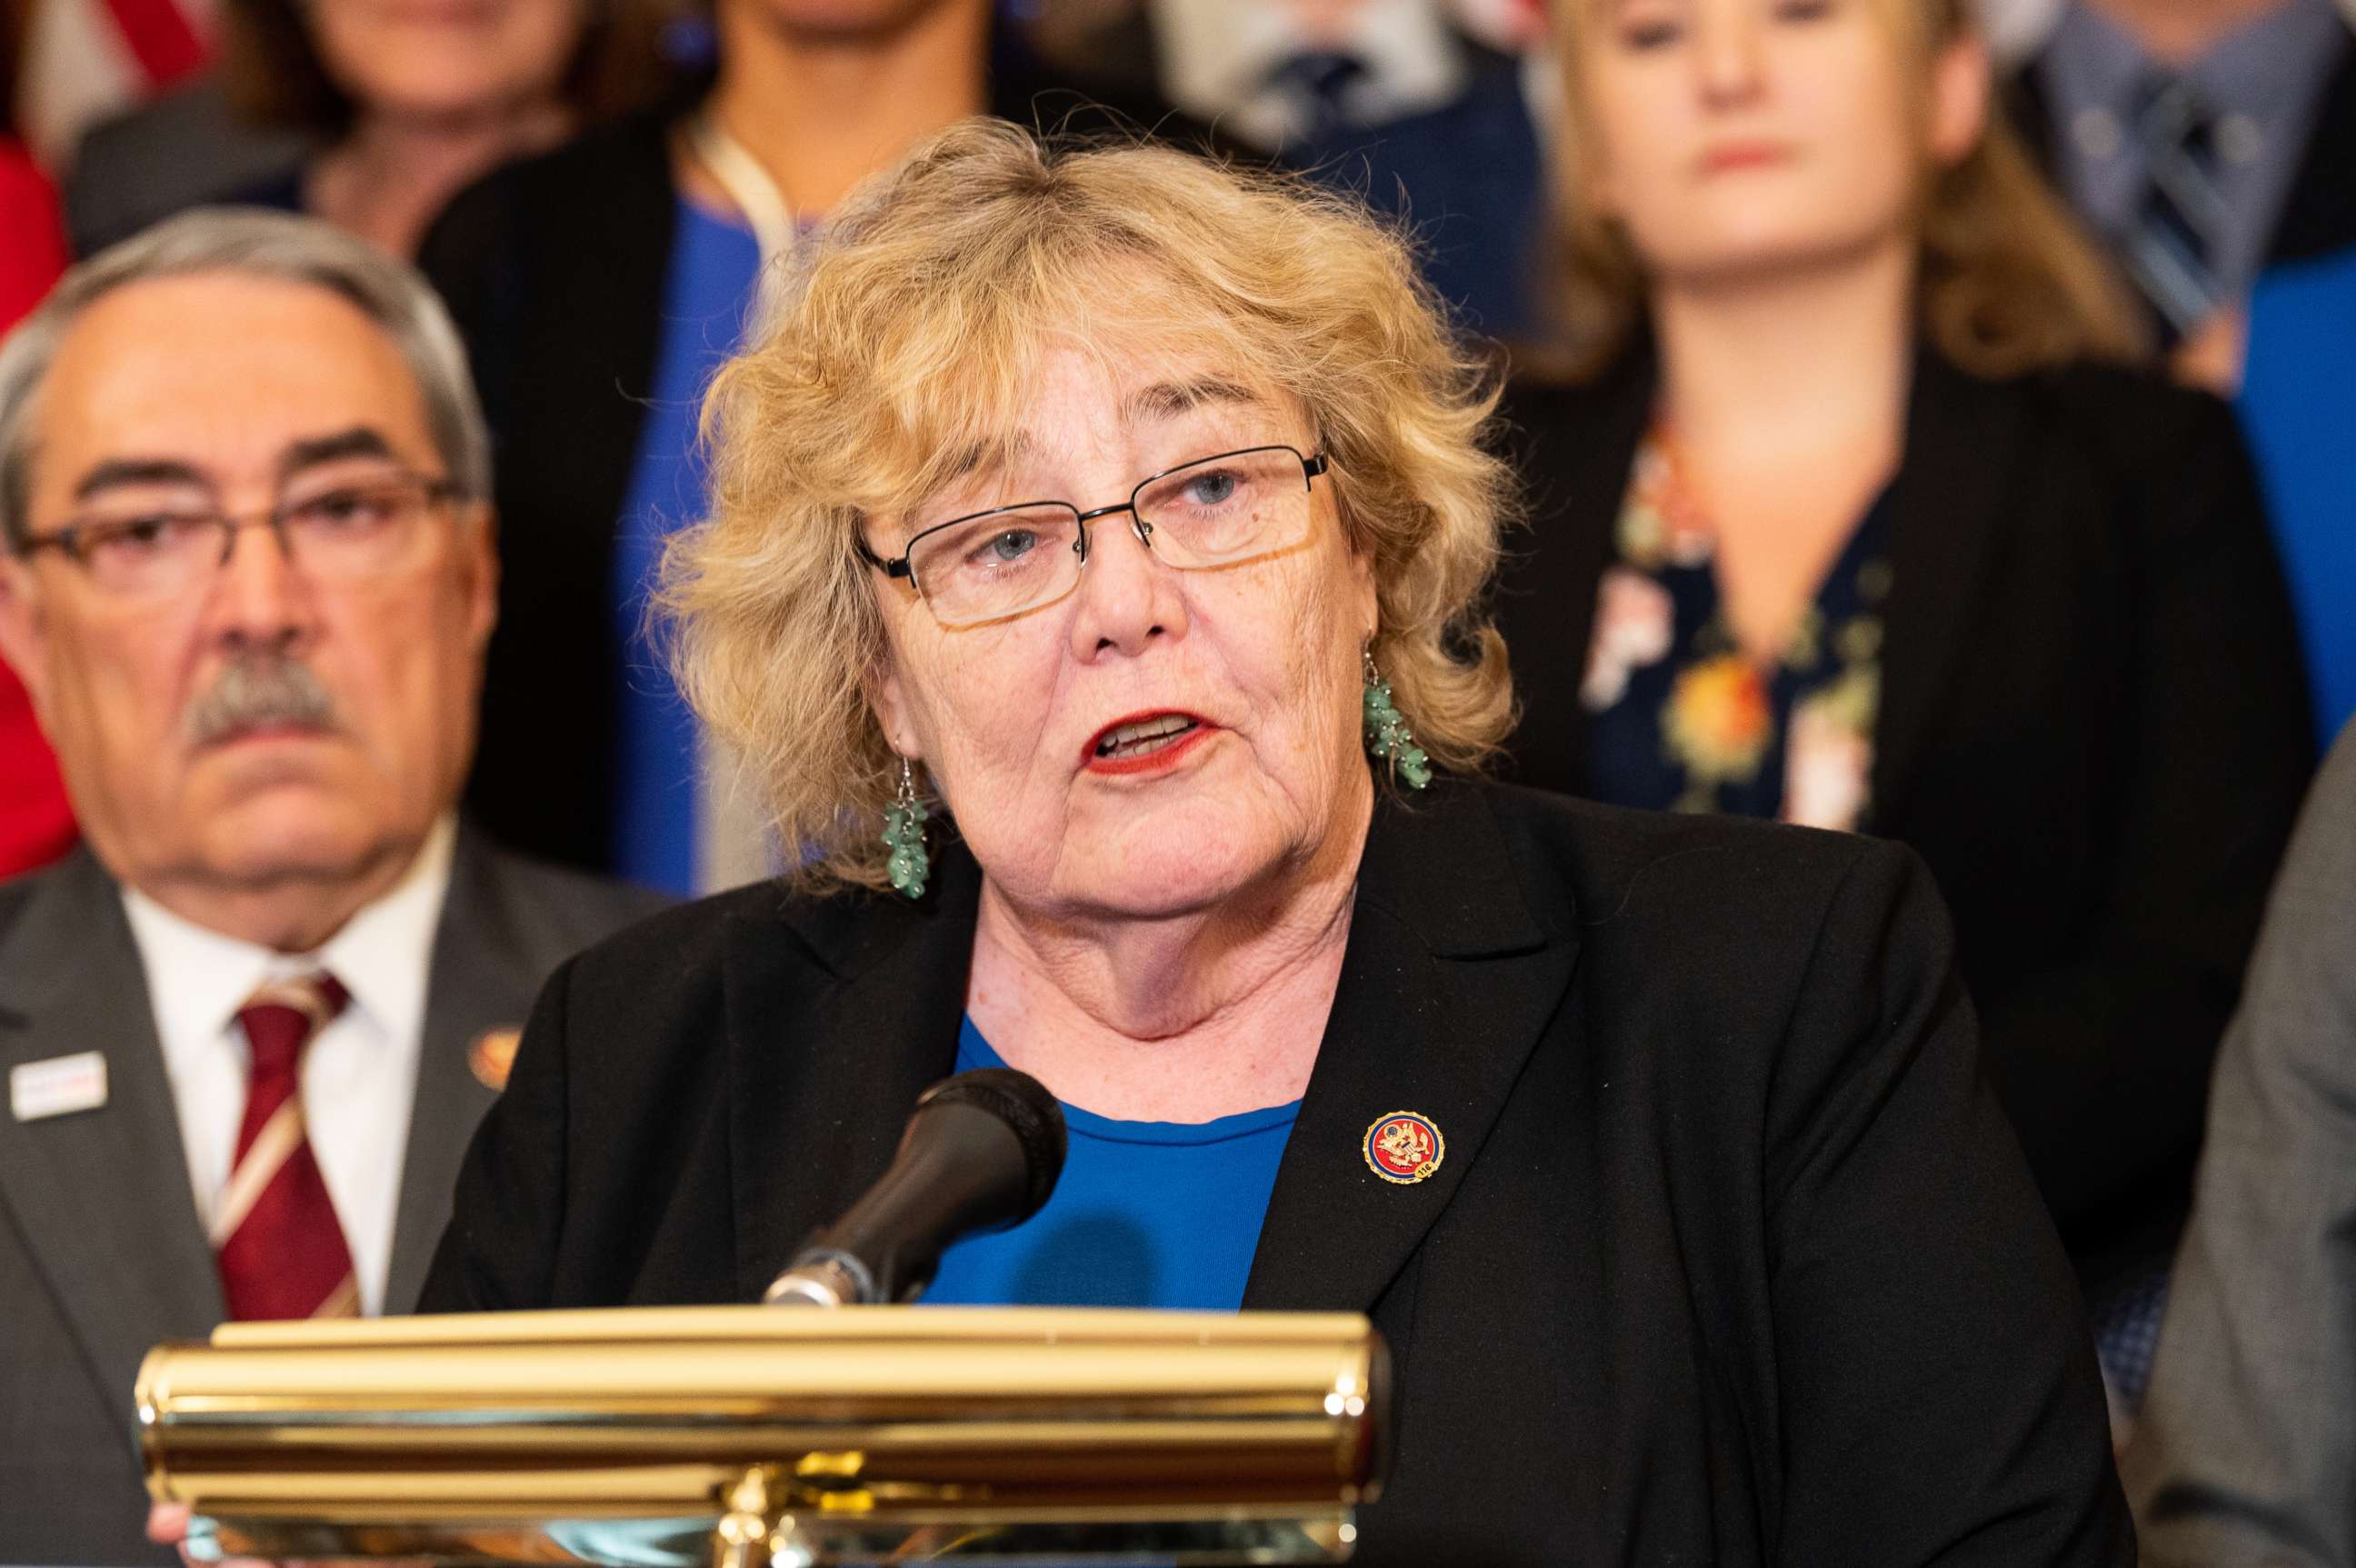 PHOTO: U.S.Representative Zoe Lofgren speaks during an event in support of the House vote on the SAFE Act, at the US Capitol in Washington, DC.